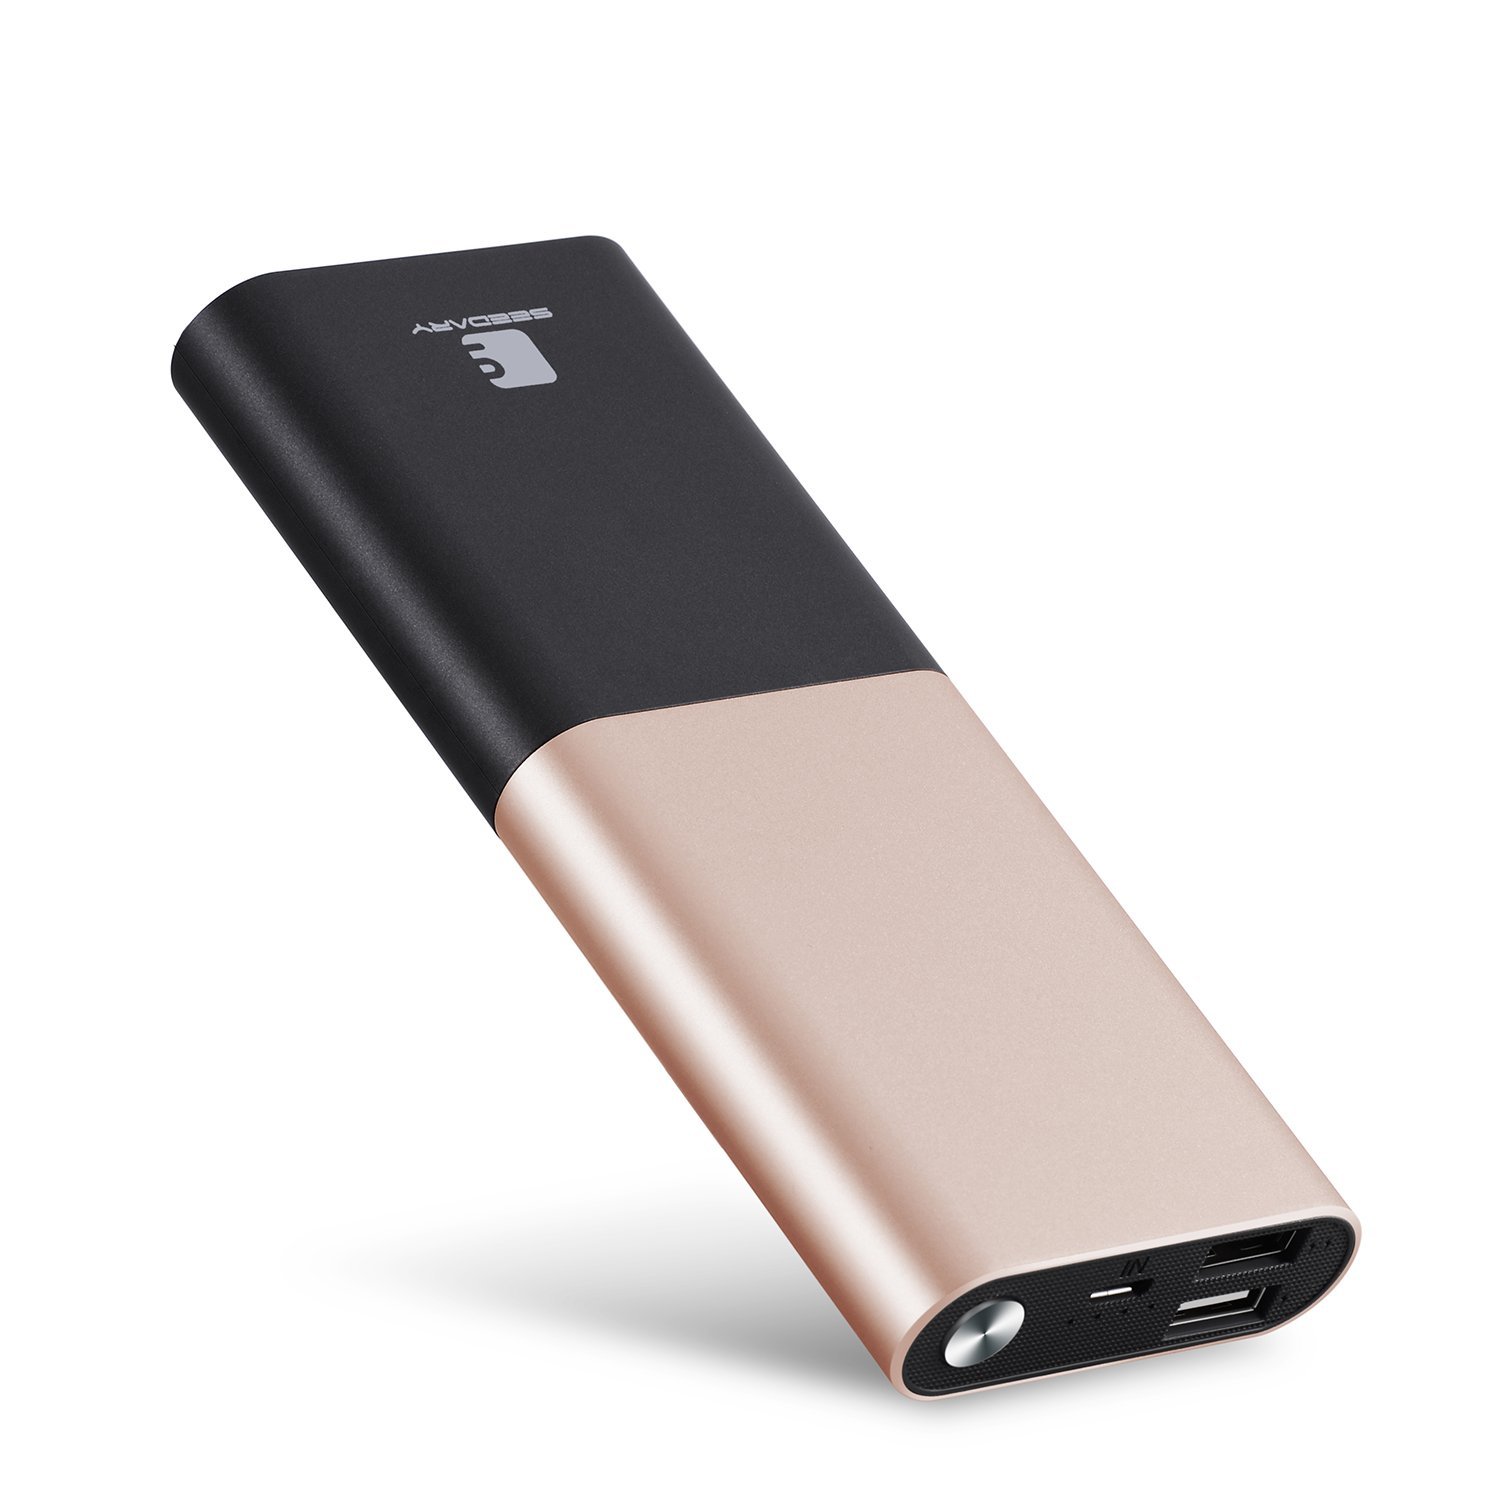 Portable power bank charger